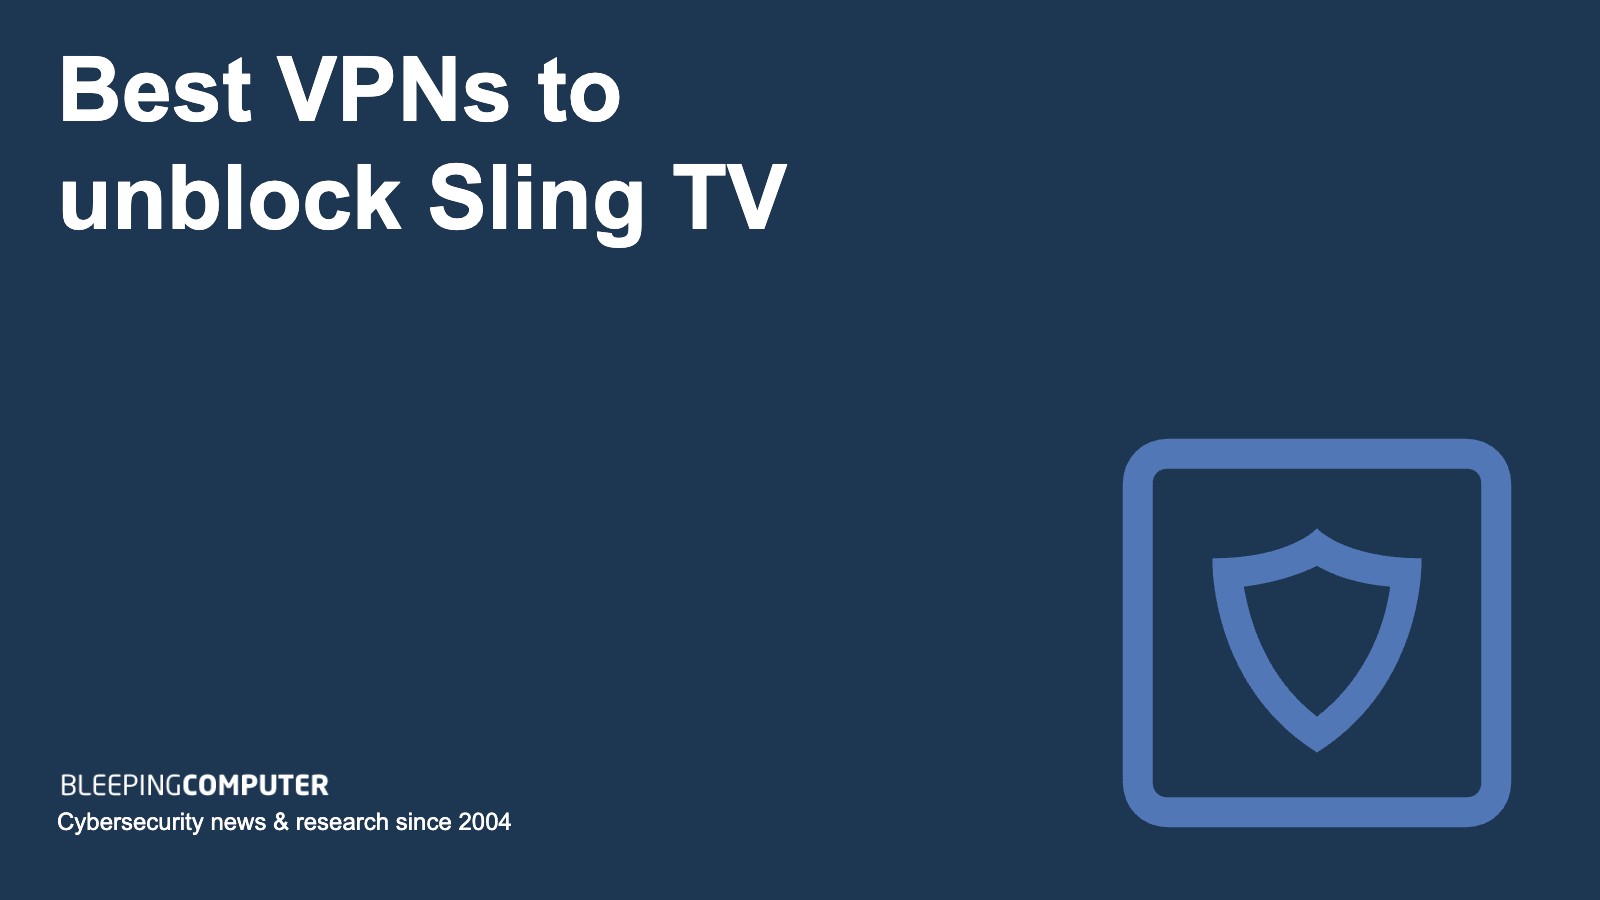 Sling TV launches new features for sports fans, including  picture-in-picture mode and an iOS widget